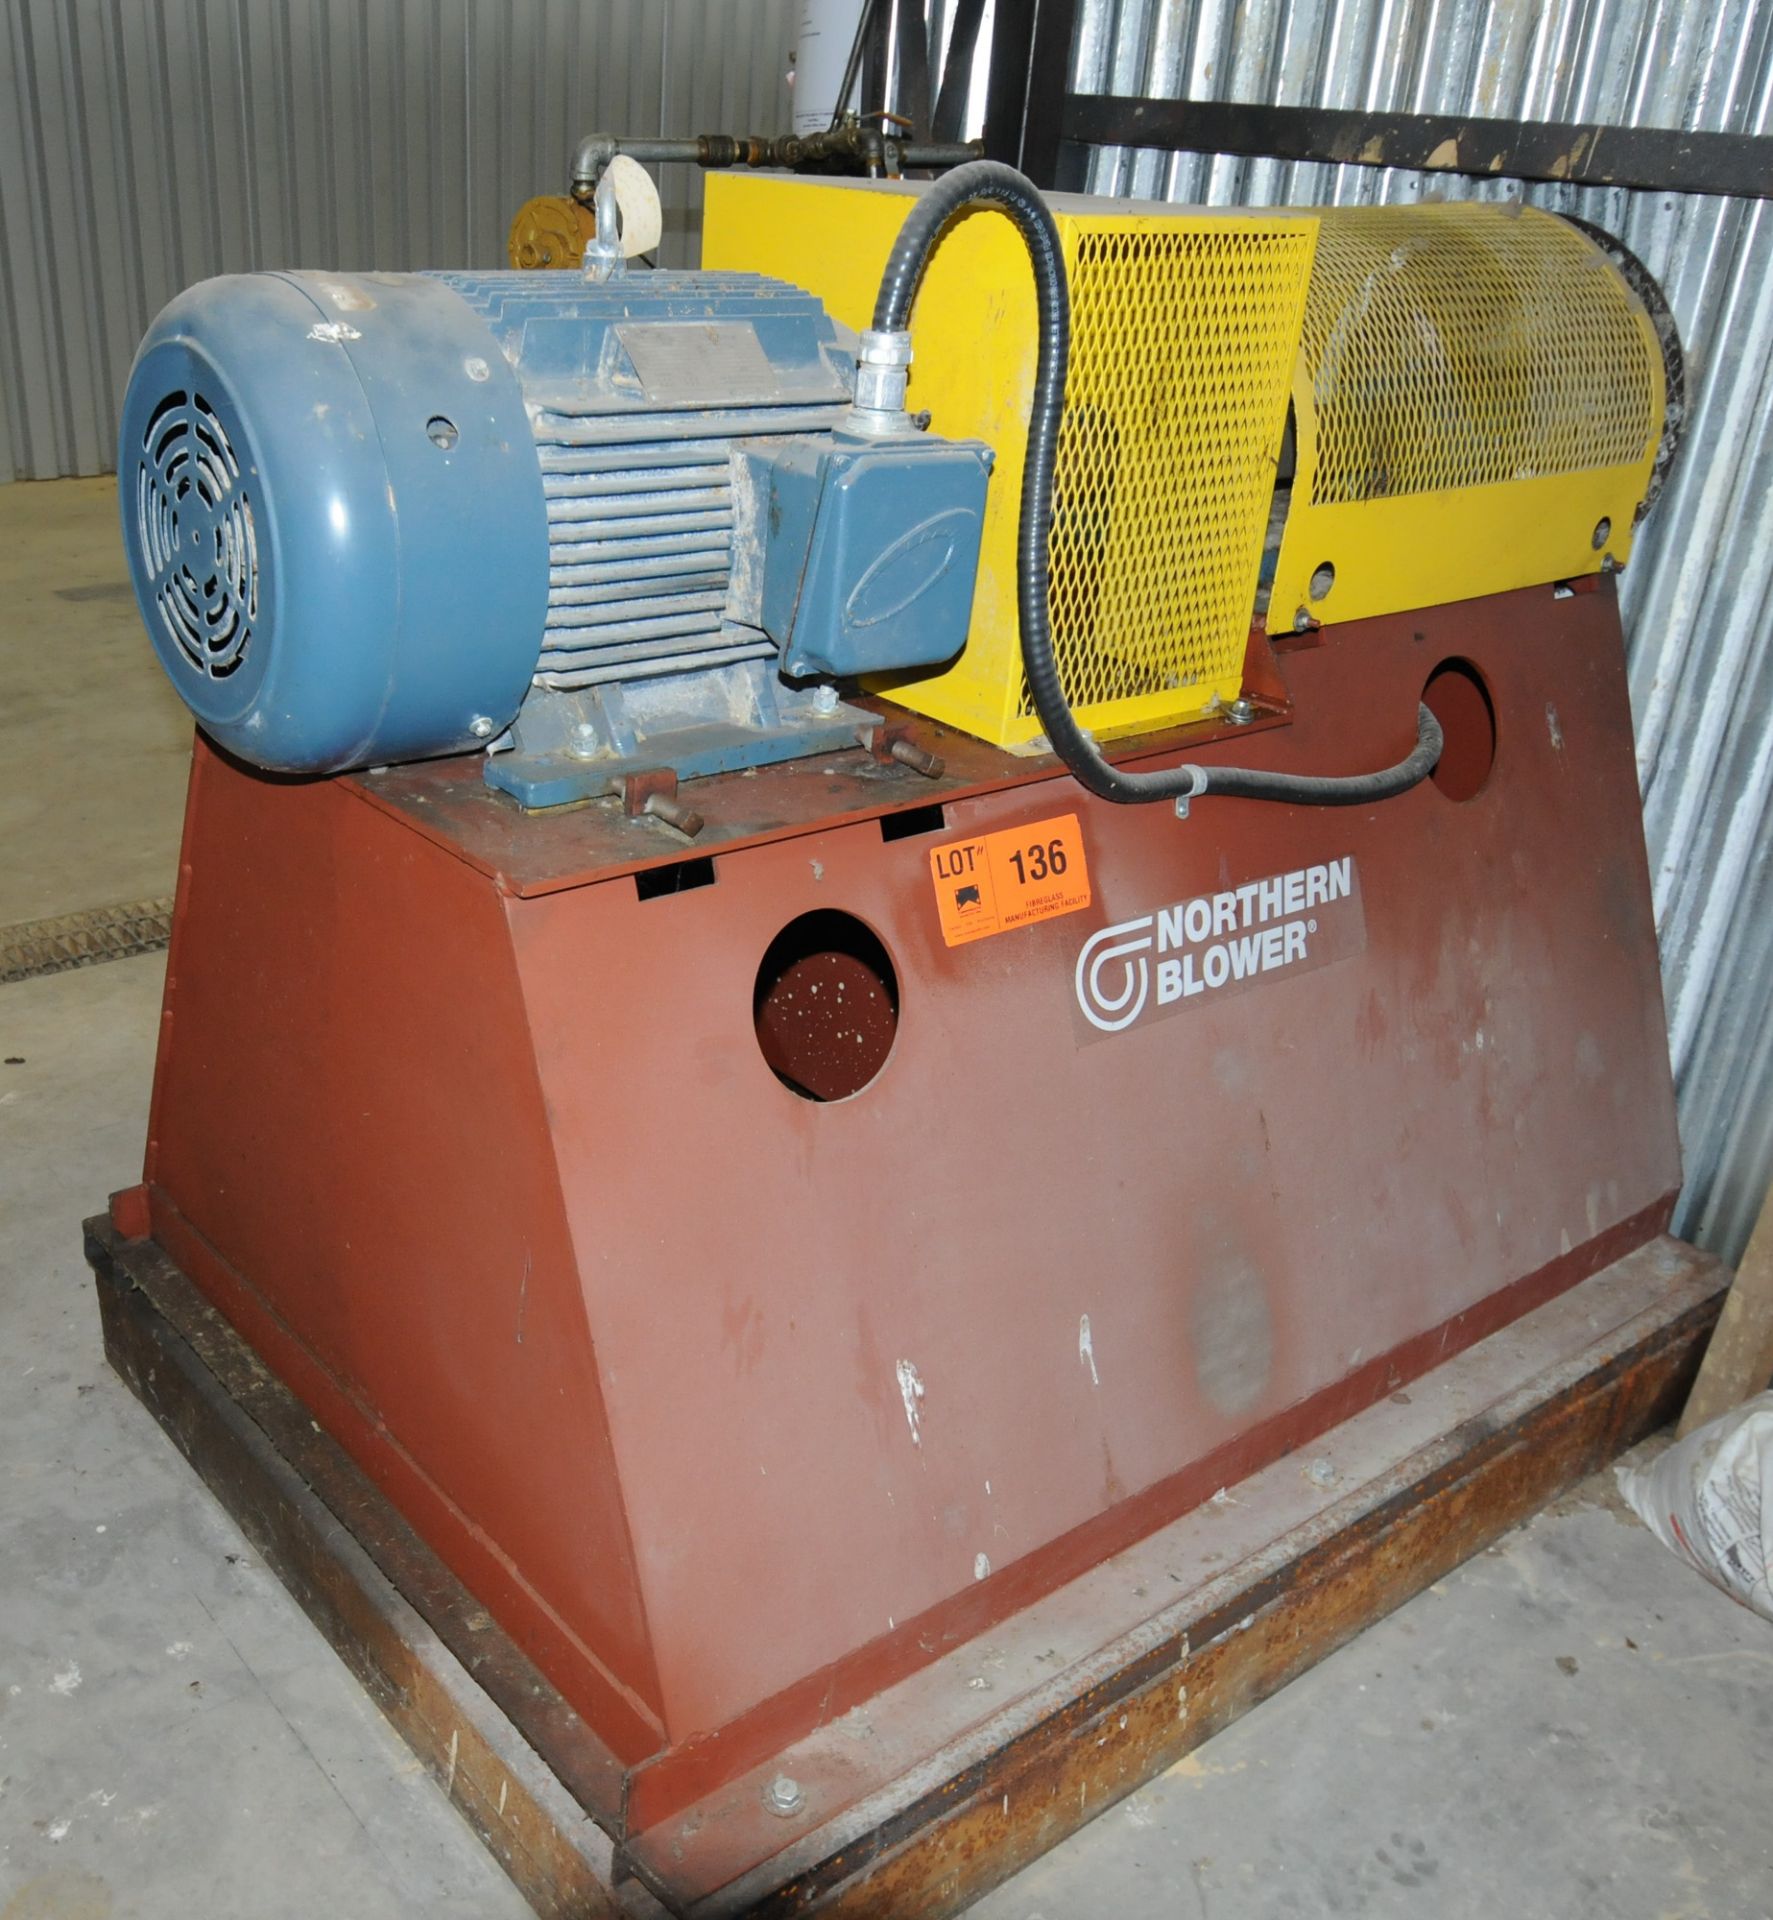 NORTHERN BLOWER 5020 CLASS 25 HP BLOWER WITH CONTROL, S/N: 53373.01-02 (CI)